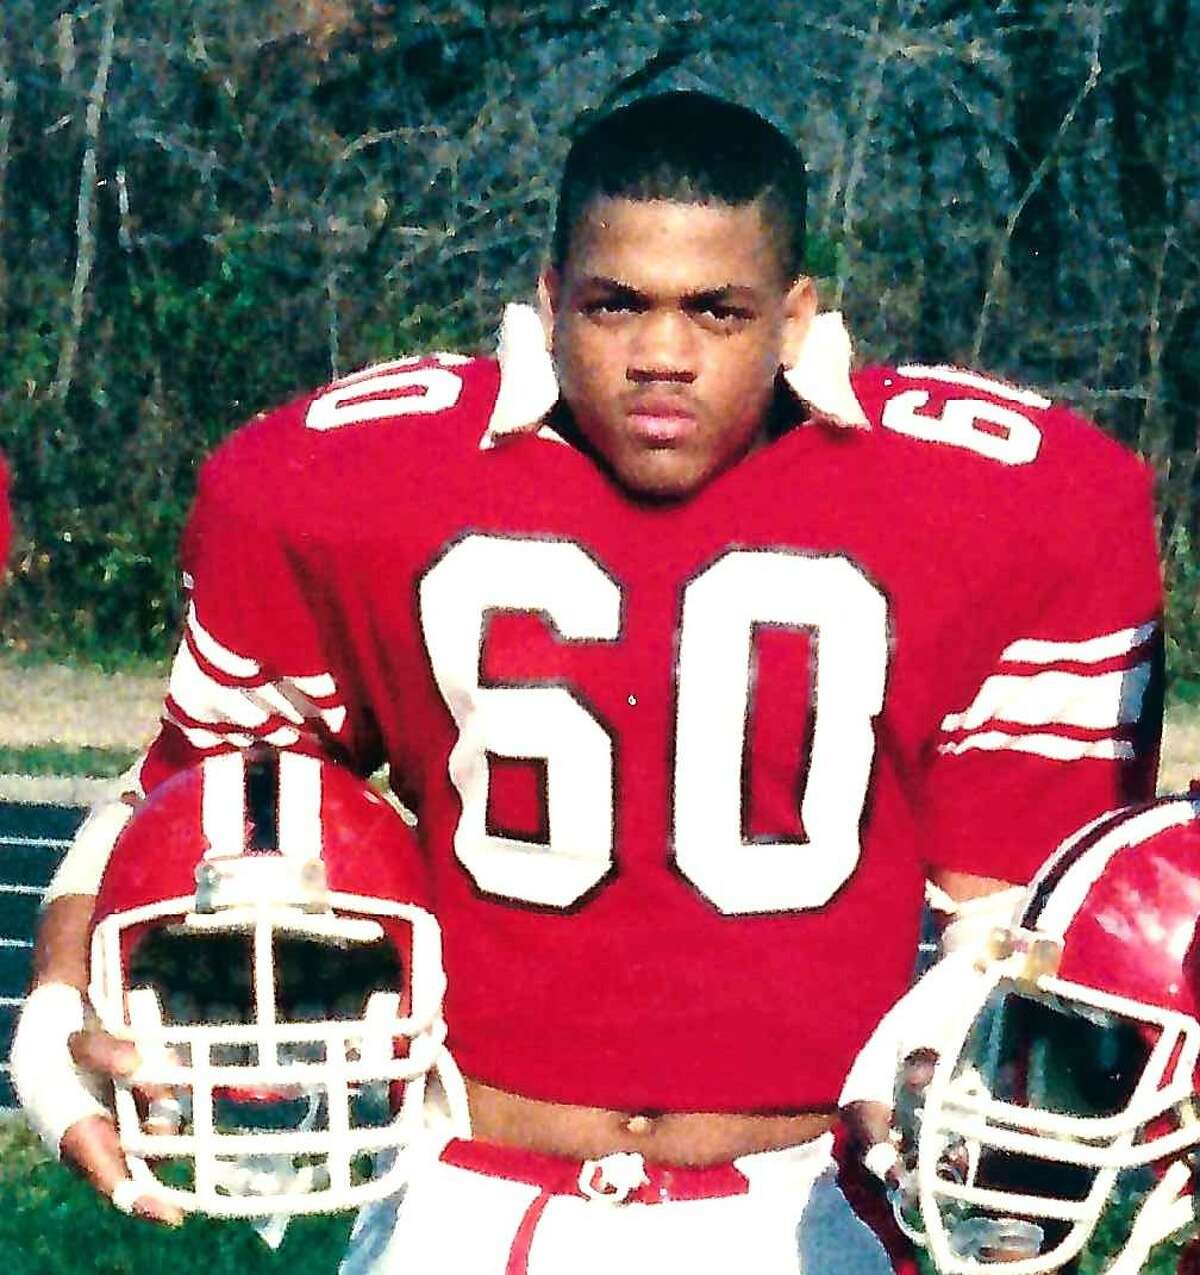 Ex-Wilbur Cross standout Brian Chisolm will be inducted into the New Haven Gridiron Club Hall of Fame on Sept. 8 at Cascade in Hamden.